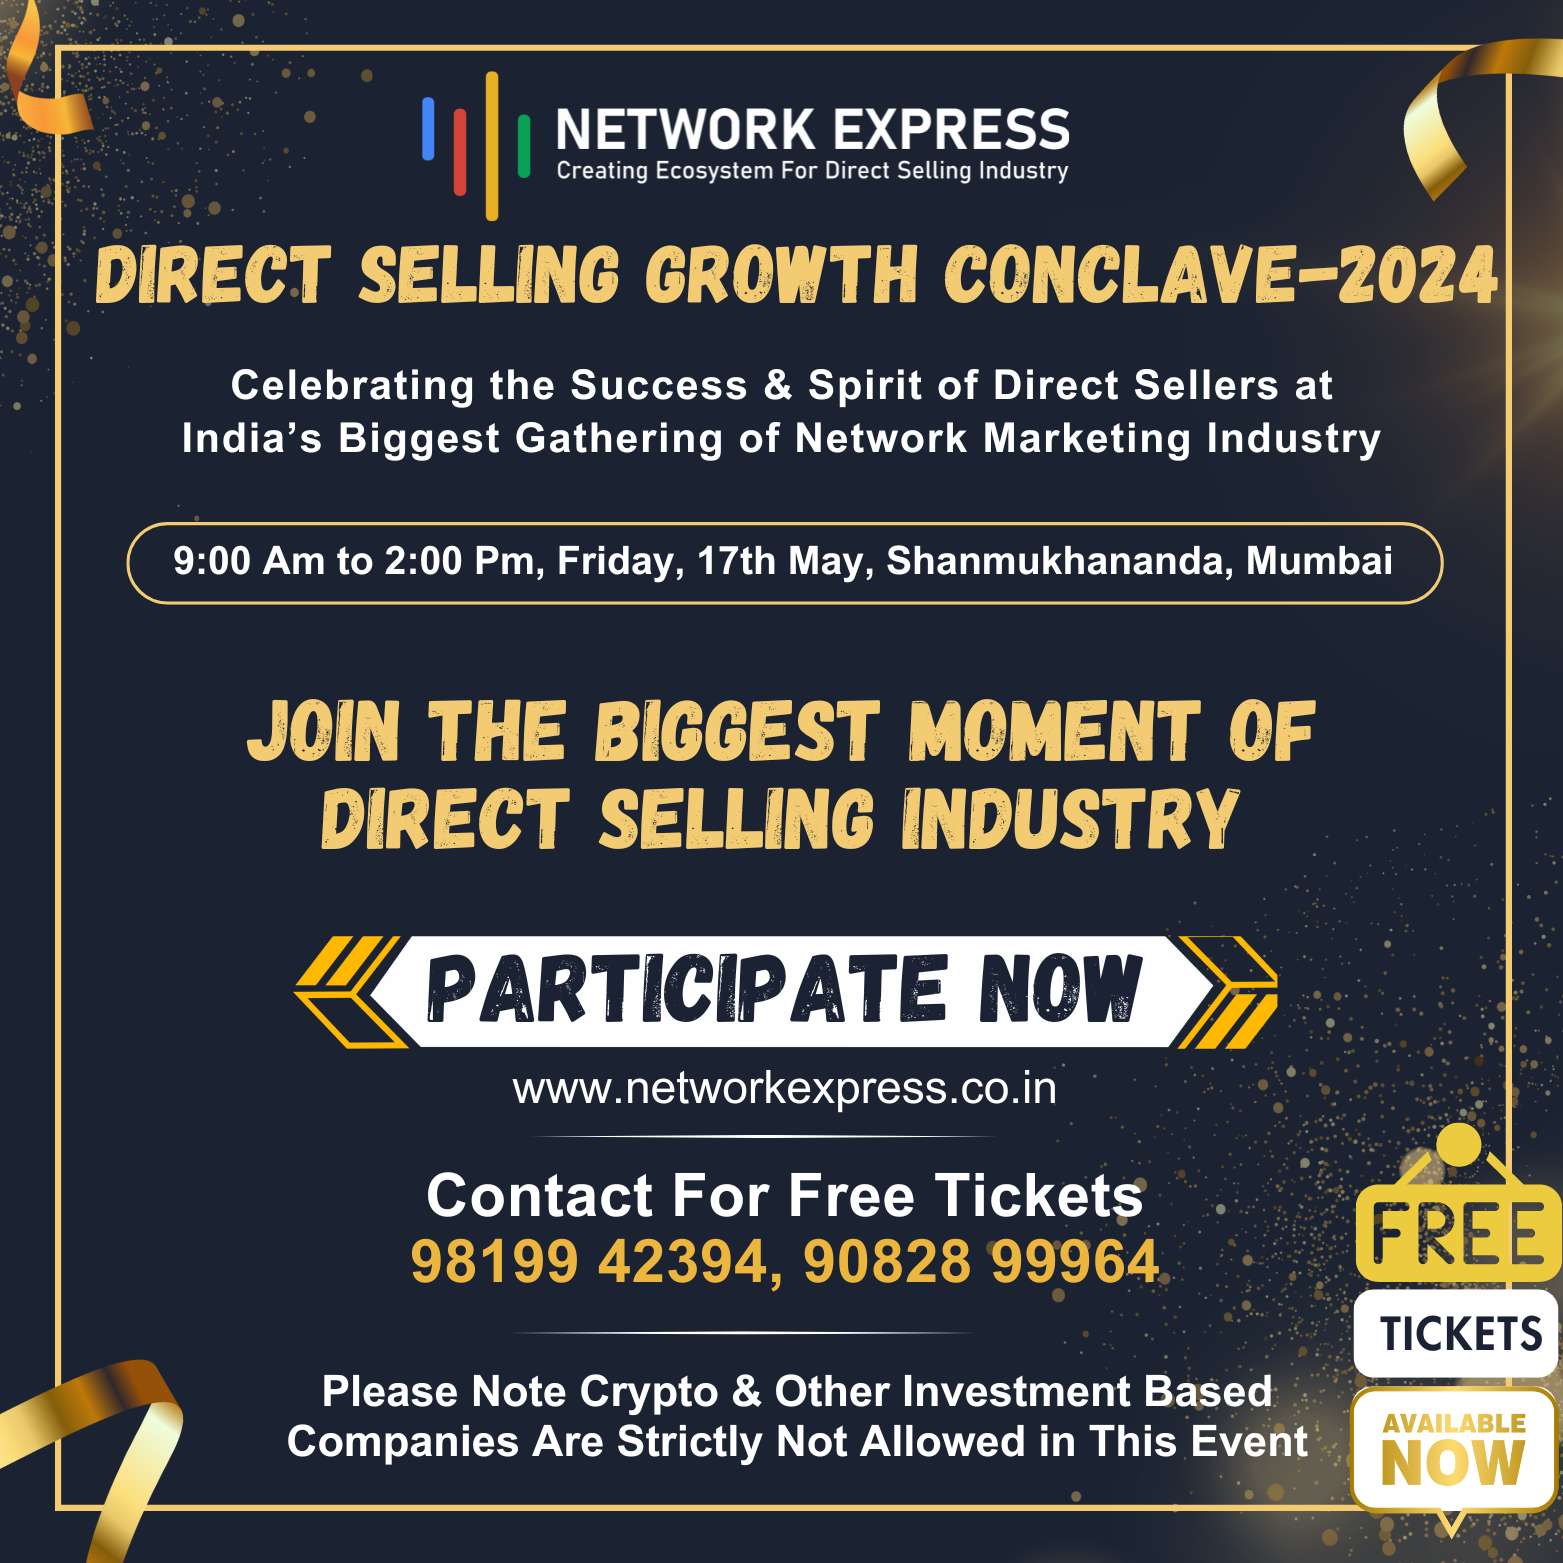 Direct Selling Growth Conclave 2024